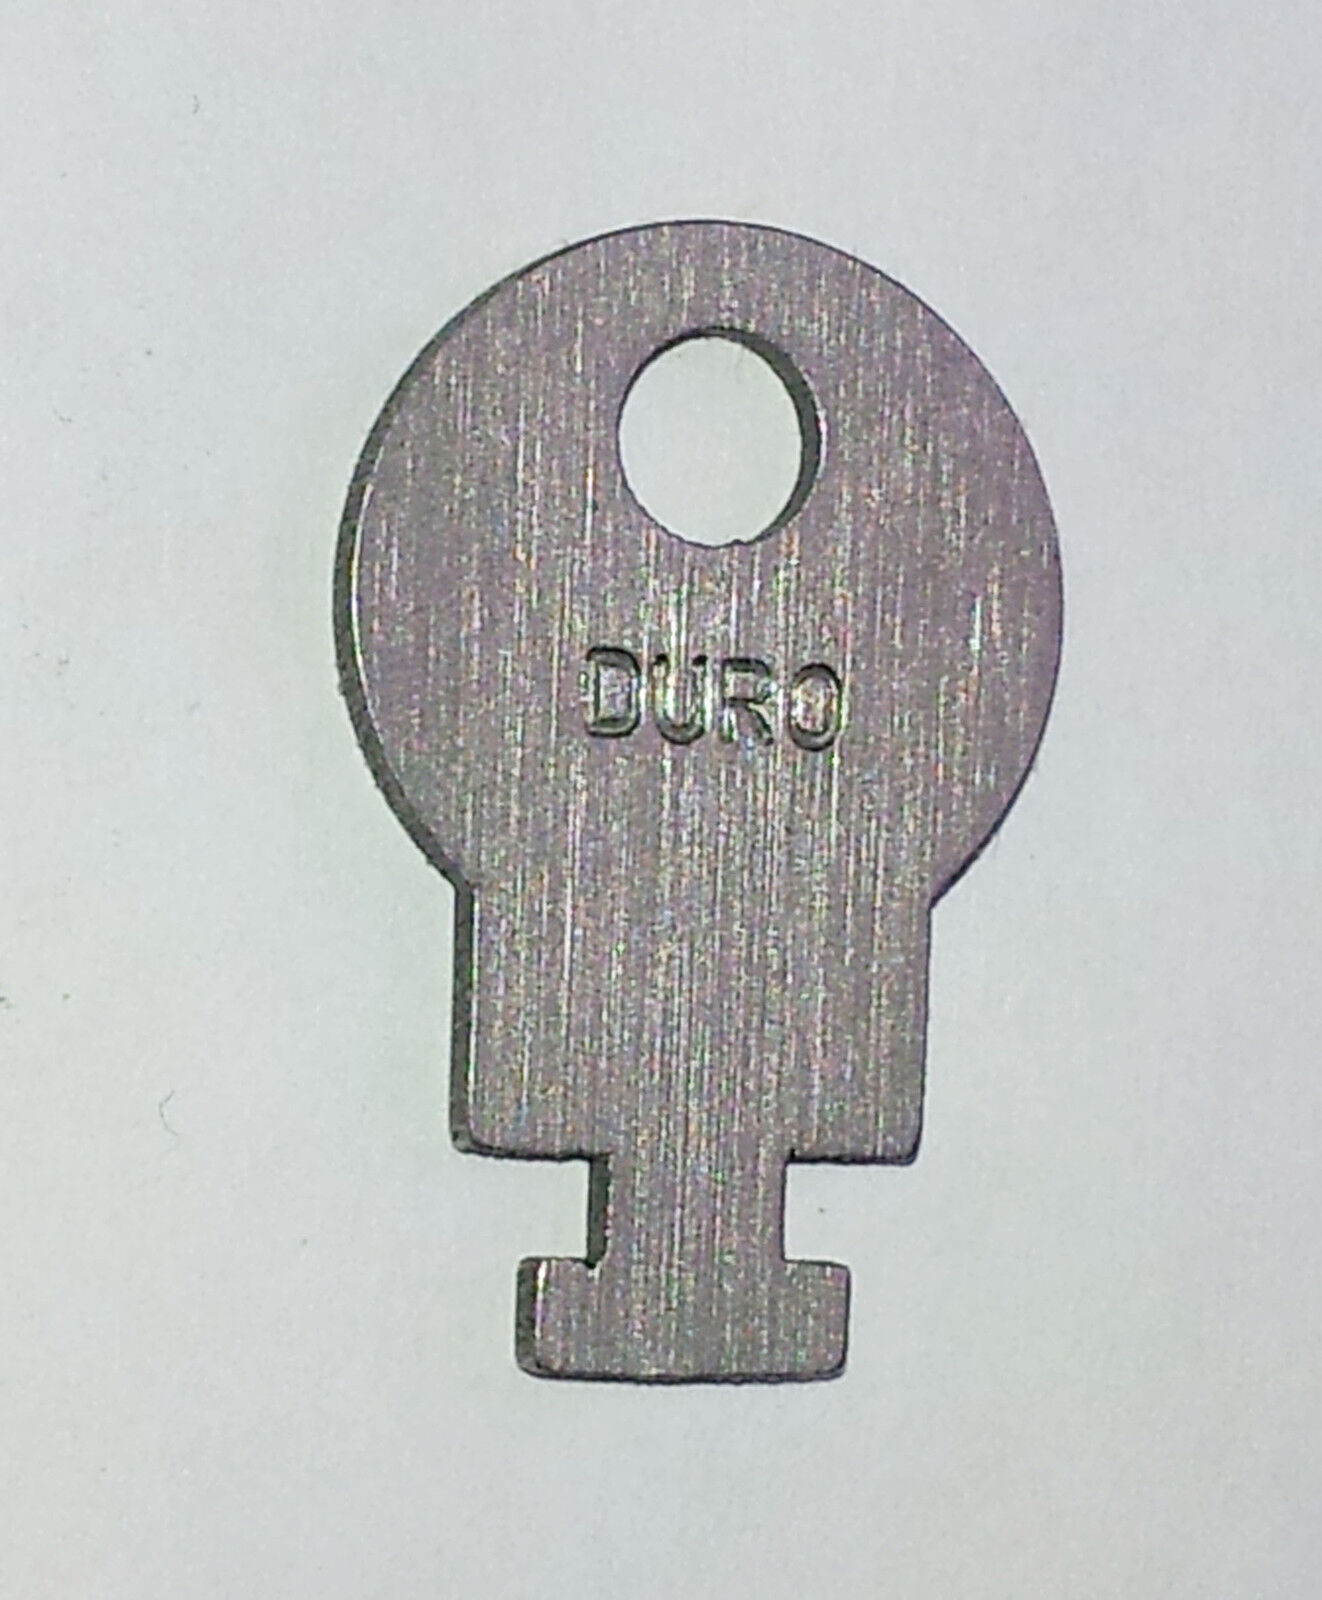 Replica REPLACEMENT KEY for DURO Coin Banks Rocket Atomic Strato Wild West